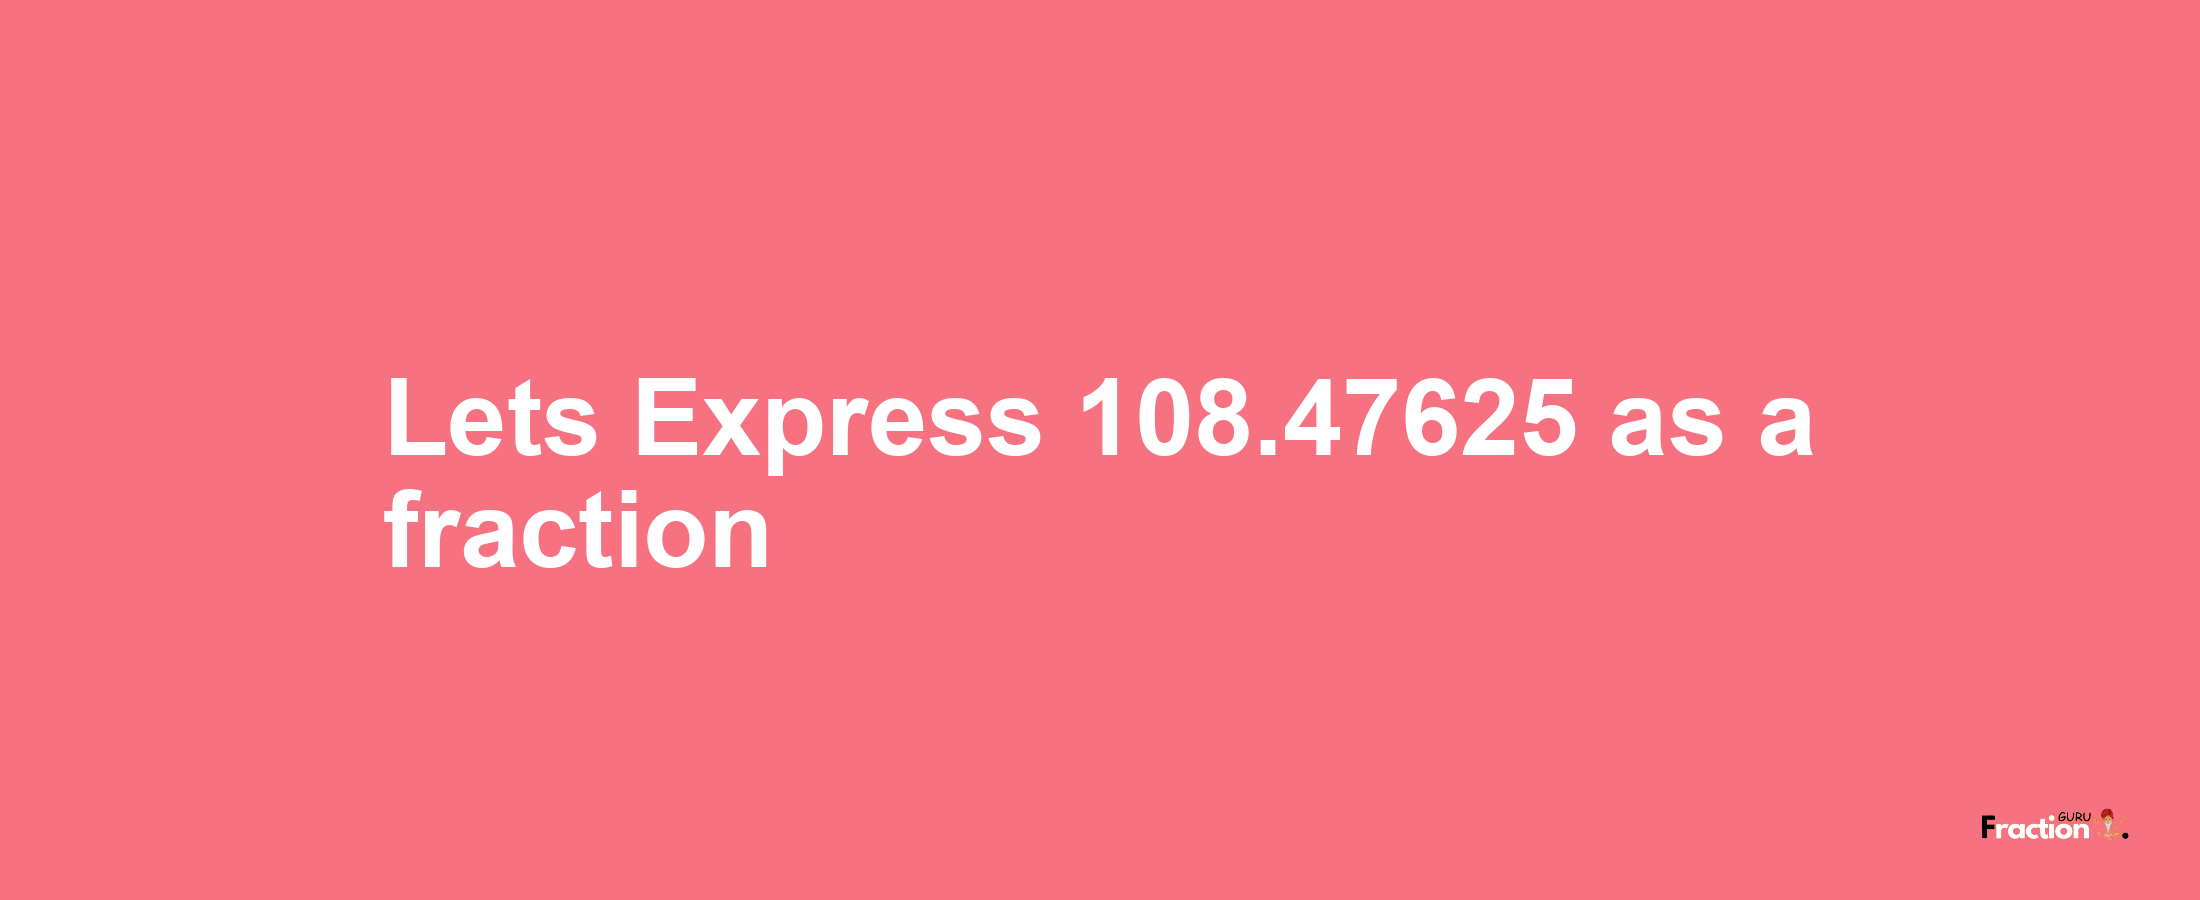 Lets Express 108.47625 as afraction